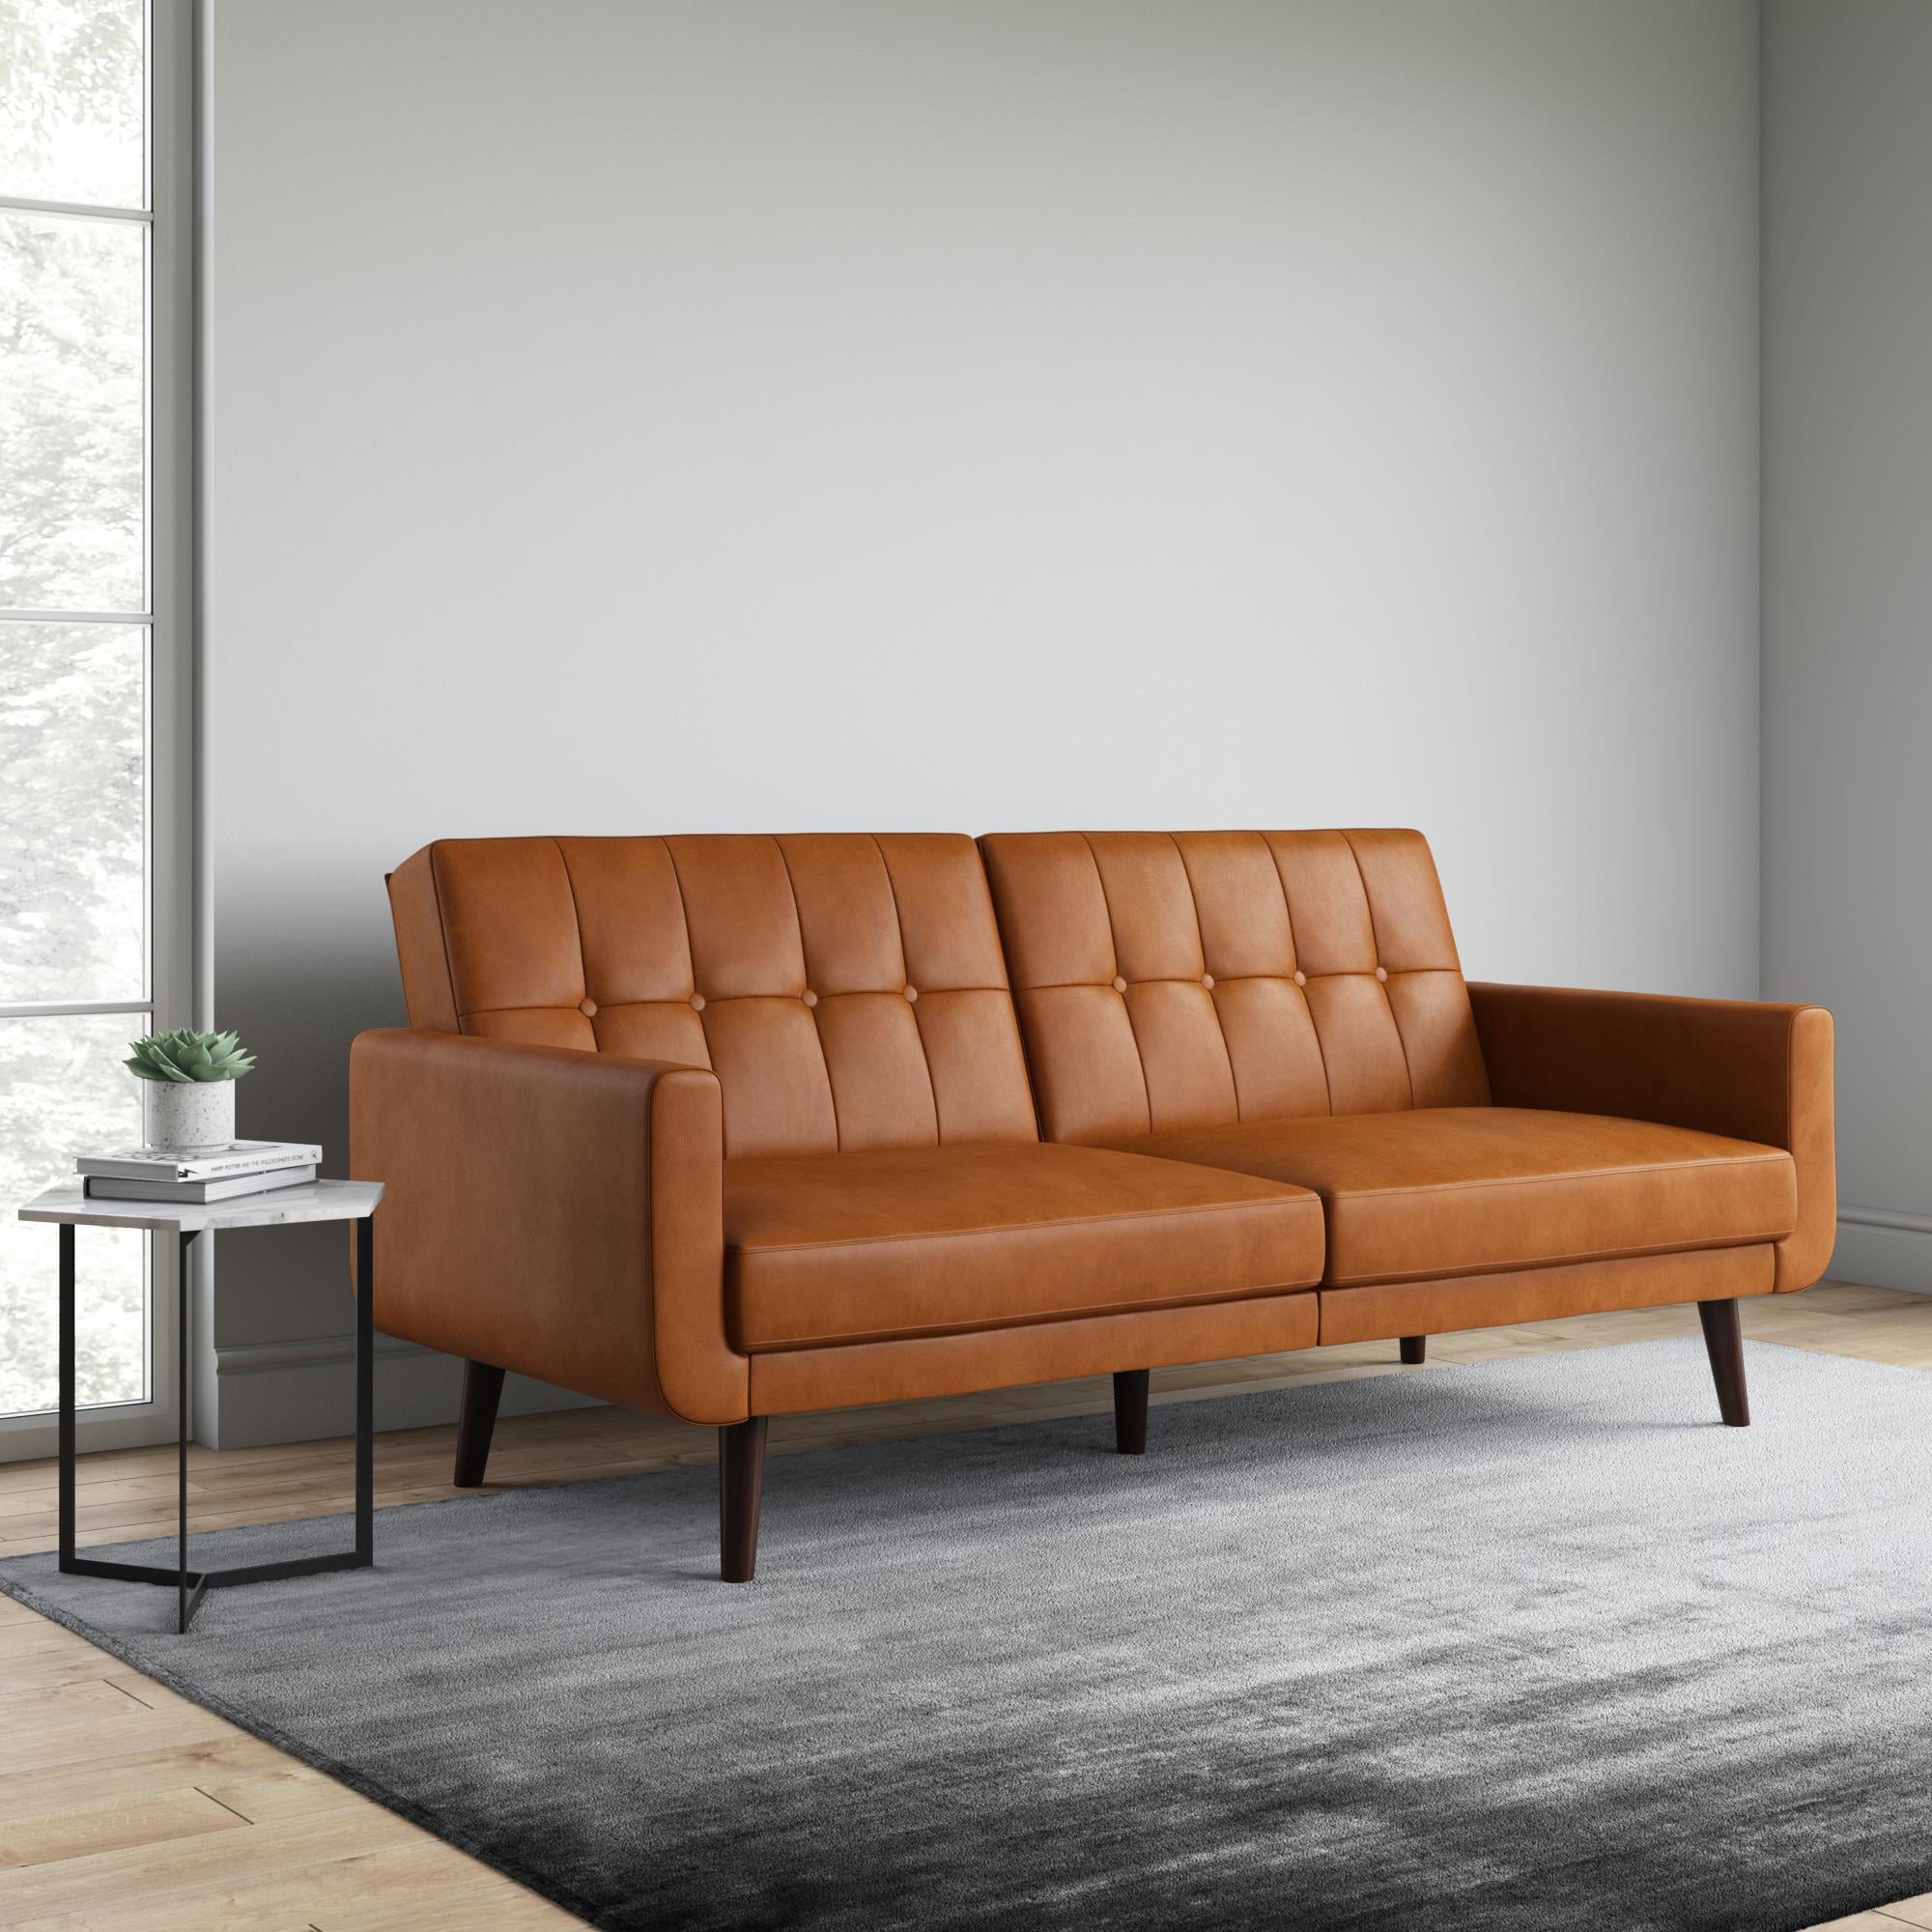 Better Homes Gardens Nola Modern, Brown Faux Leather Sofa Bed